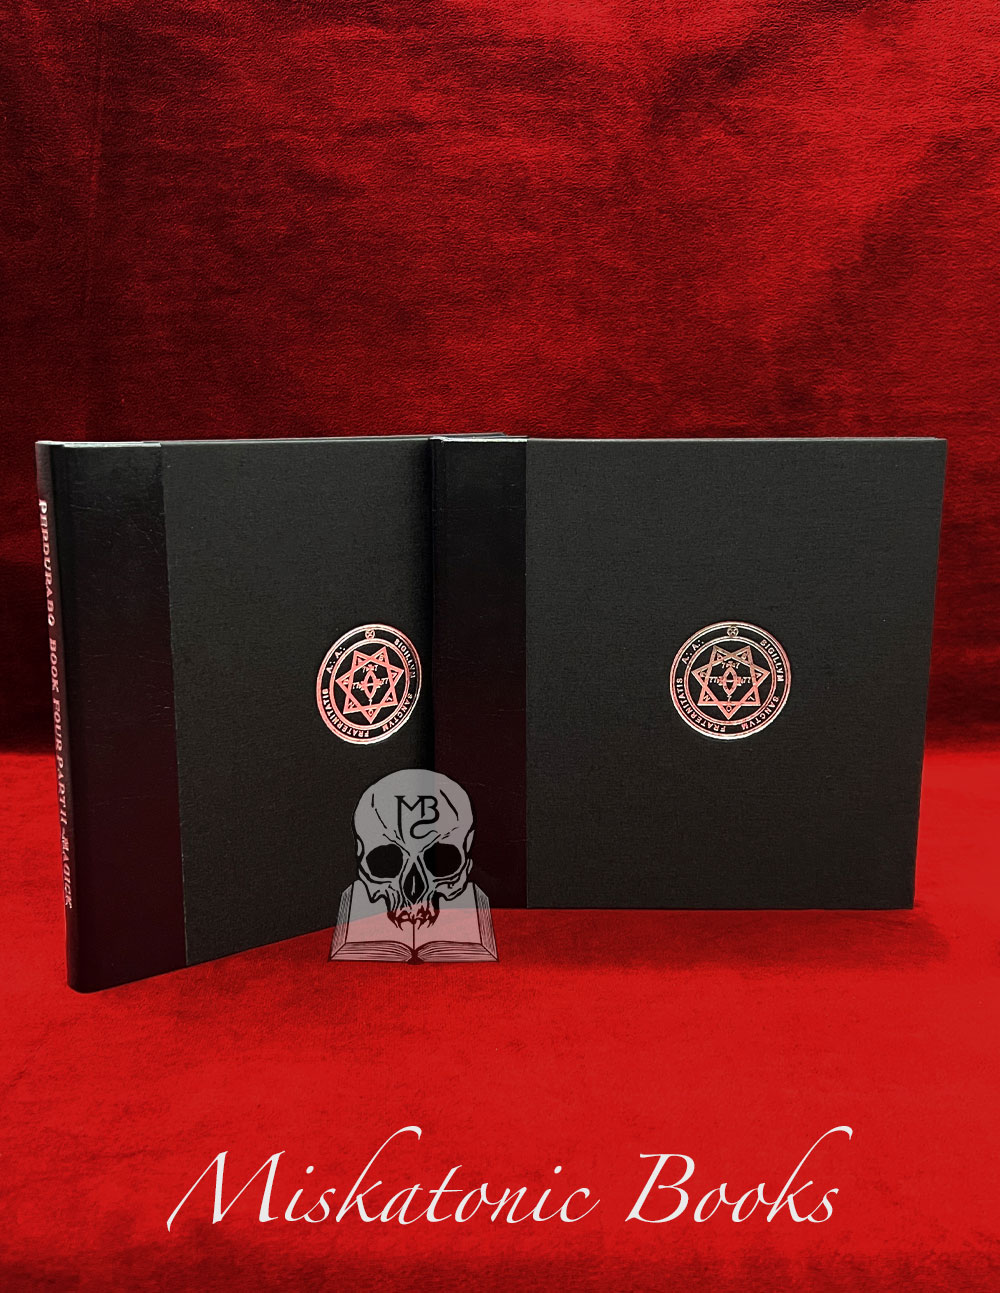 BOOK FOUR Part 1 : MYSTICISM &  Part 2 : MAGICK by Aleister Crowley and  Mary D’Este Sturges (Soror Virakam) - (Limited Edition Hardcover Quarter Bound in Leather and Linen)